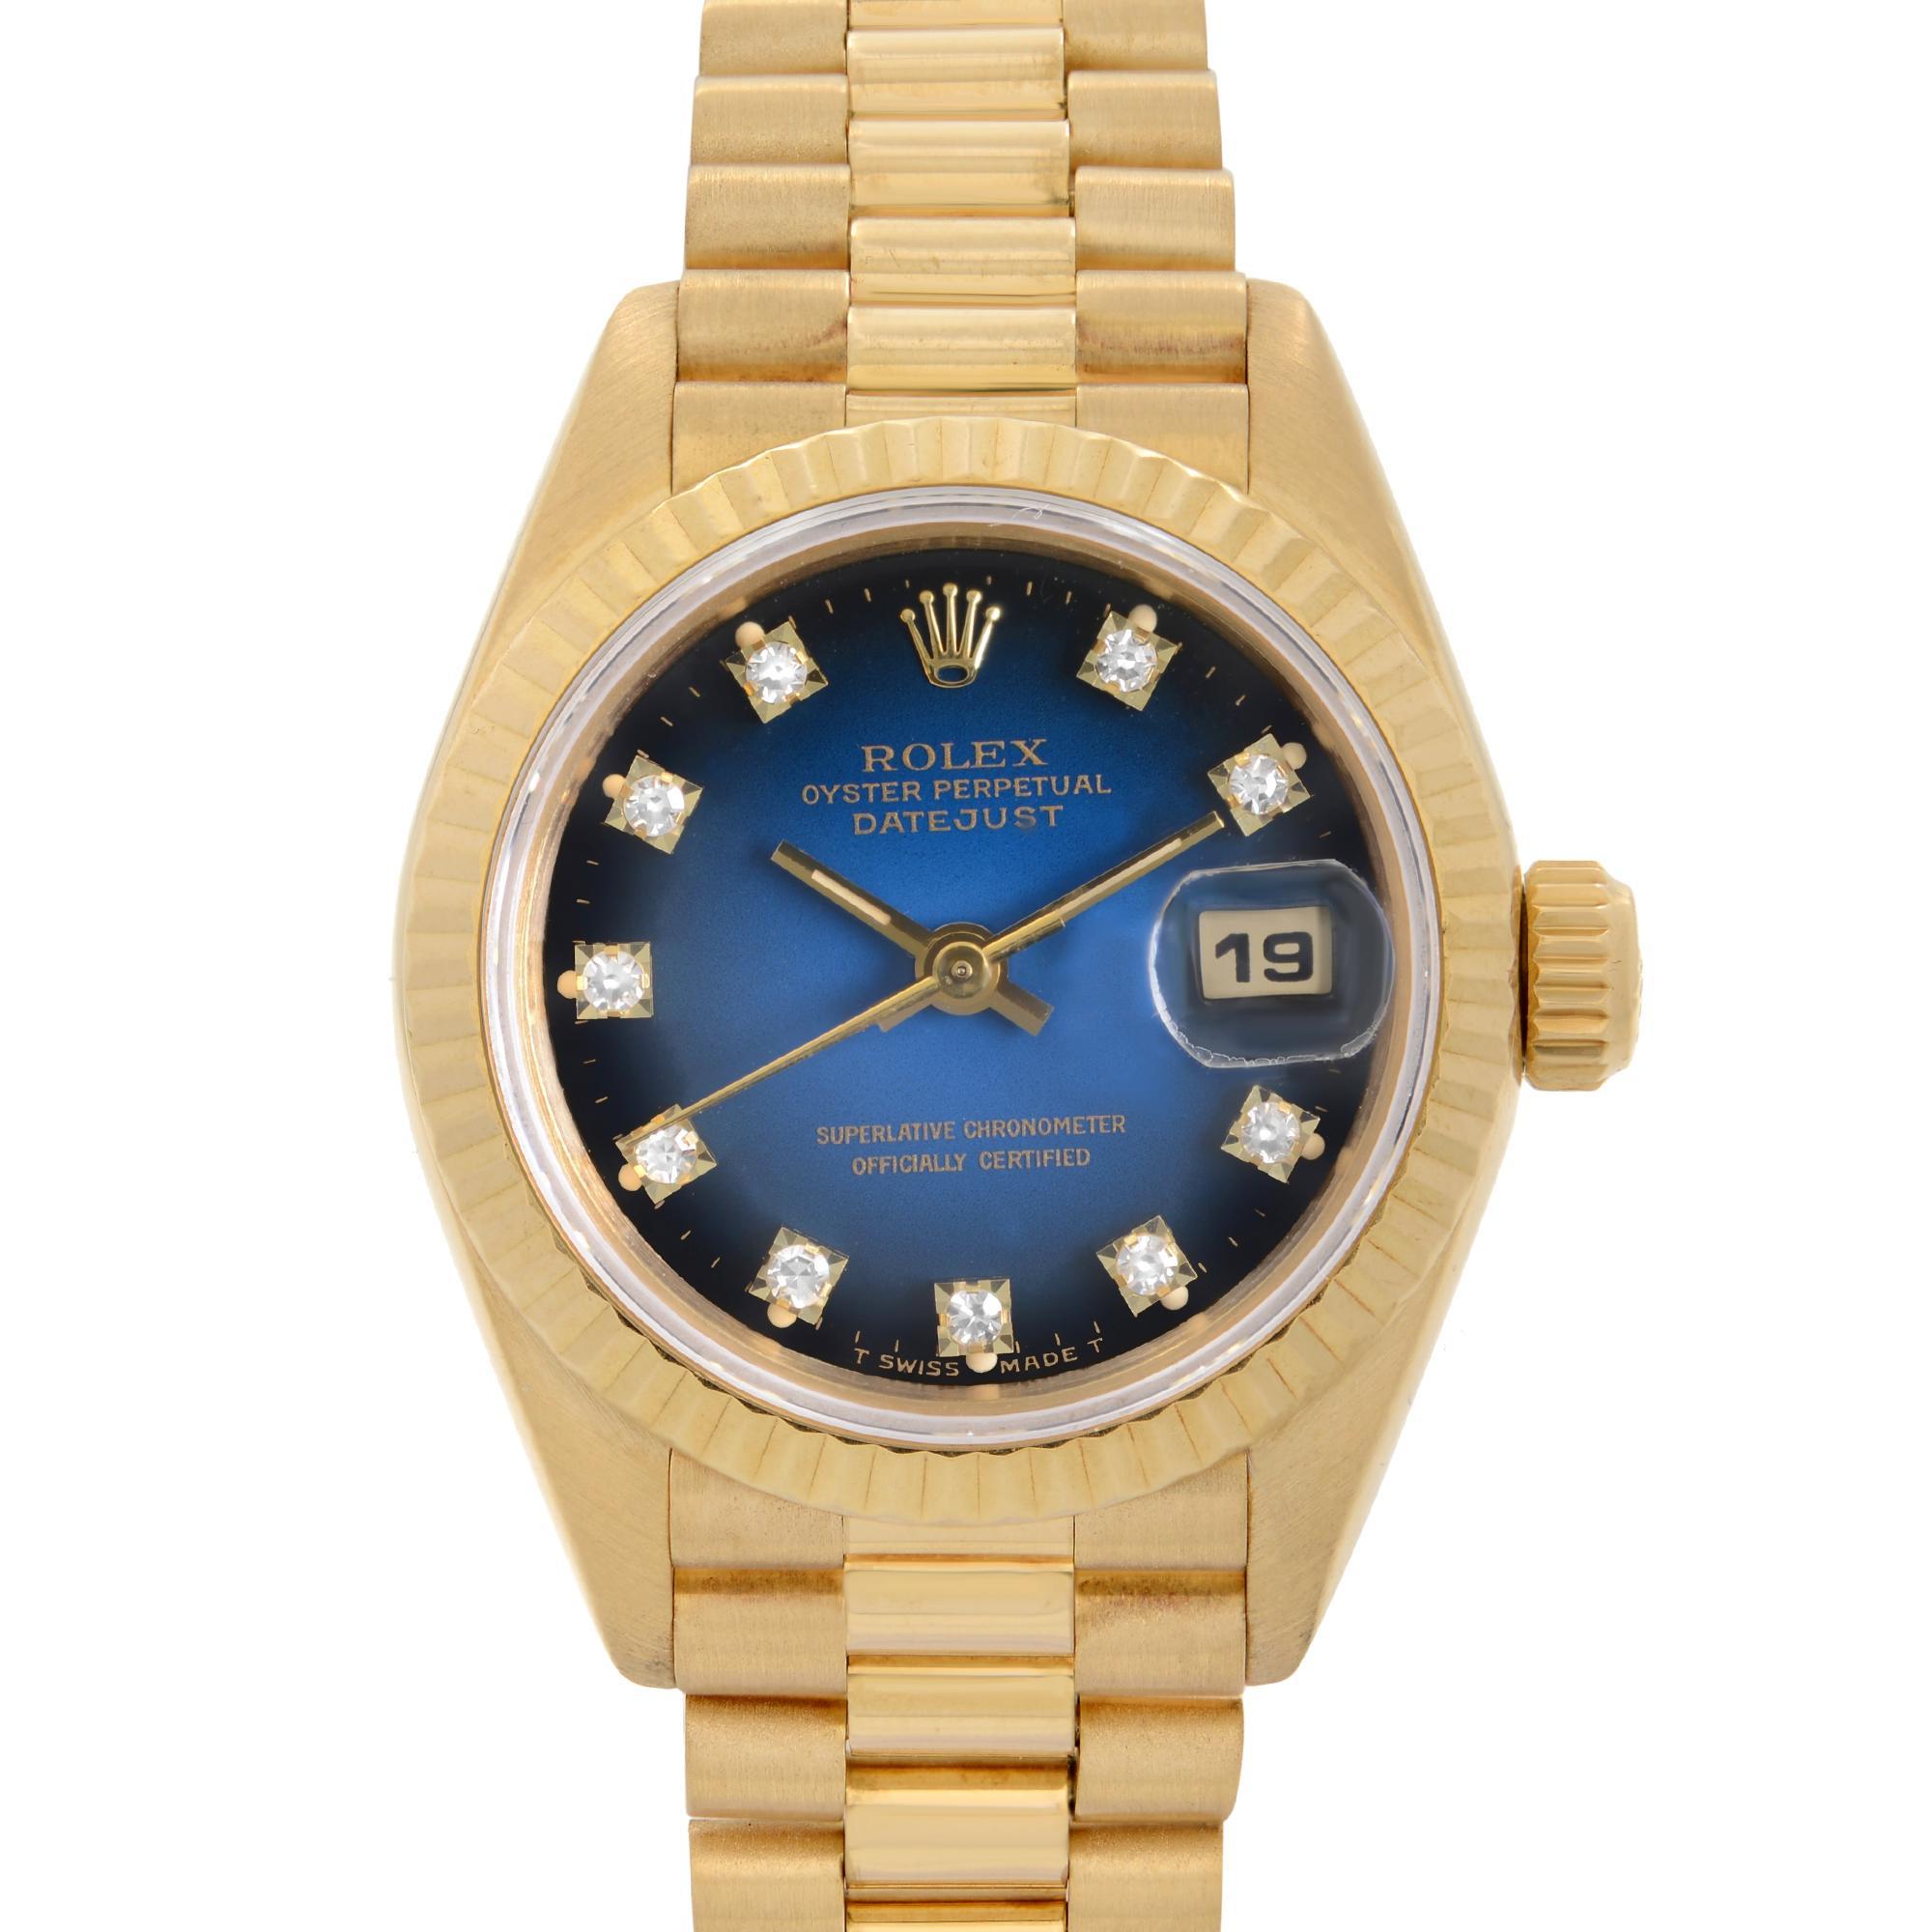 Pre-Owned, Rolex Datejust 26mm 18K Yellow Gold Blue Black Ombre Dial Automatic Ladies Watch 69178. This Beautiful Ladie's Timepiece was Produced in 1993 and is Powered by Mechanical (Automatic) Movement And Features: Round 18k Gold Case with a 18k